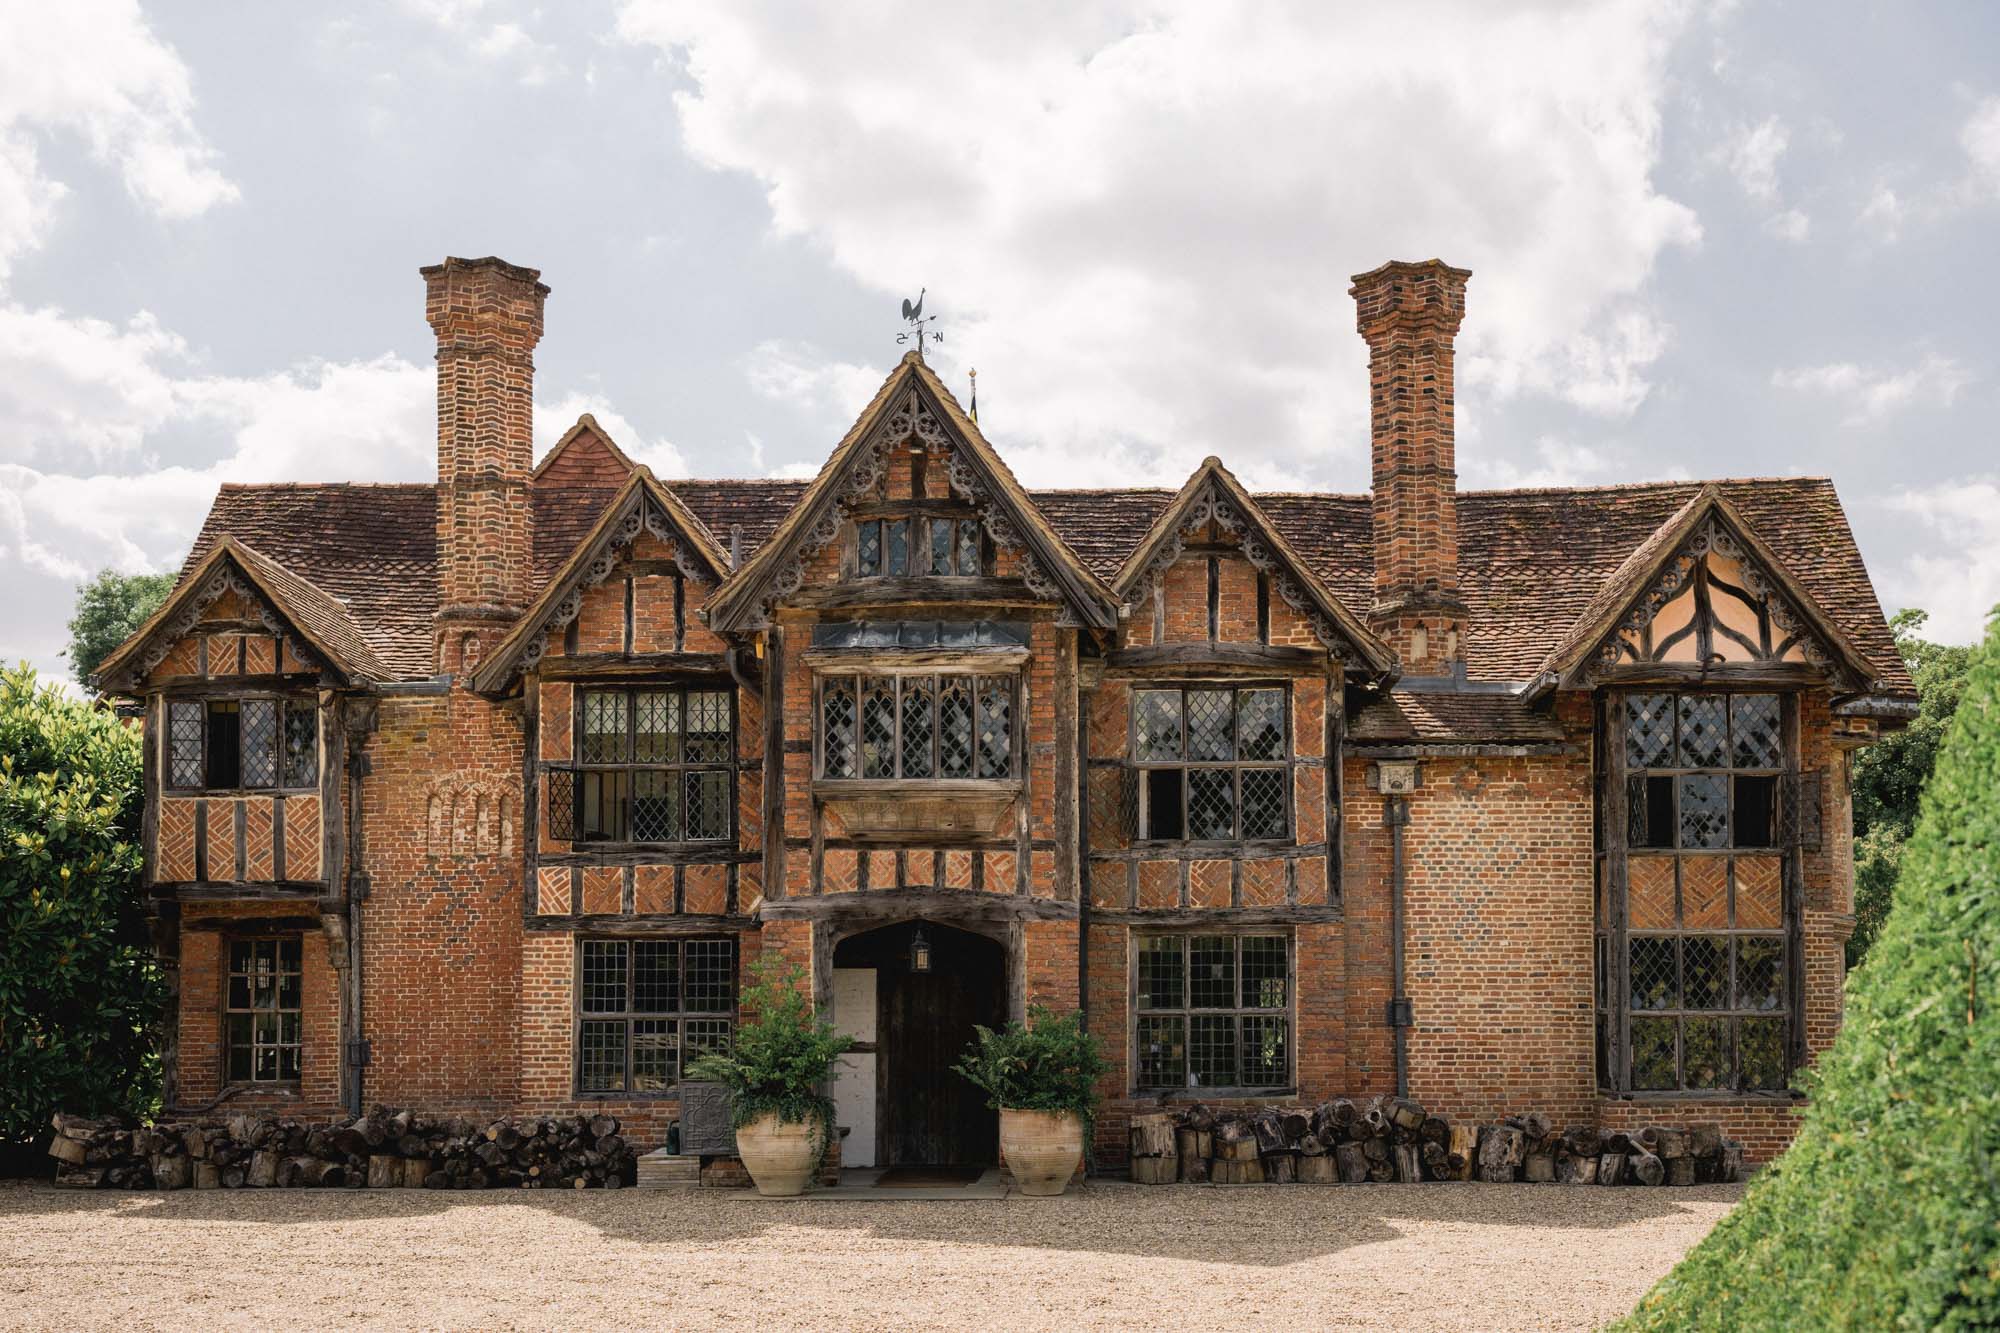 Dorney Court Wedding Venue in Buckinghamshire on a bright and sunny day in the Summer.